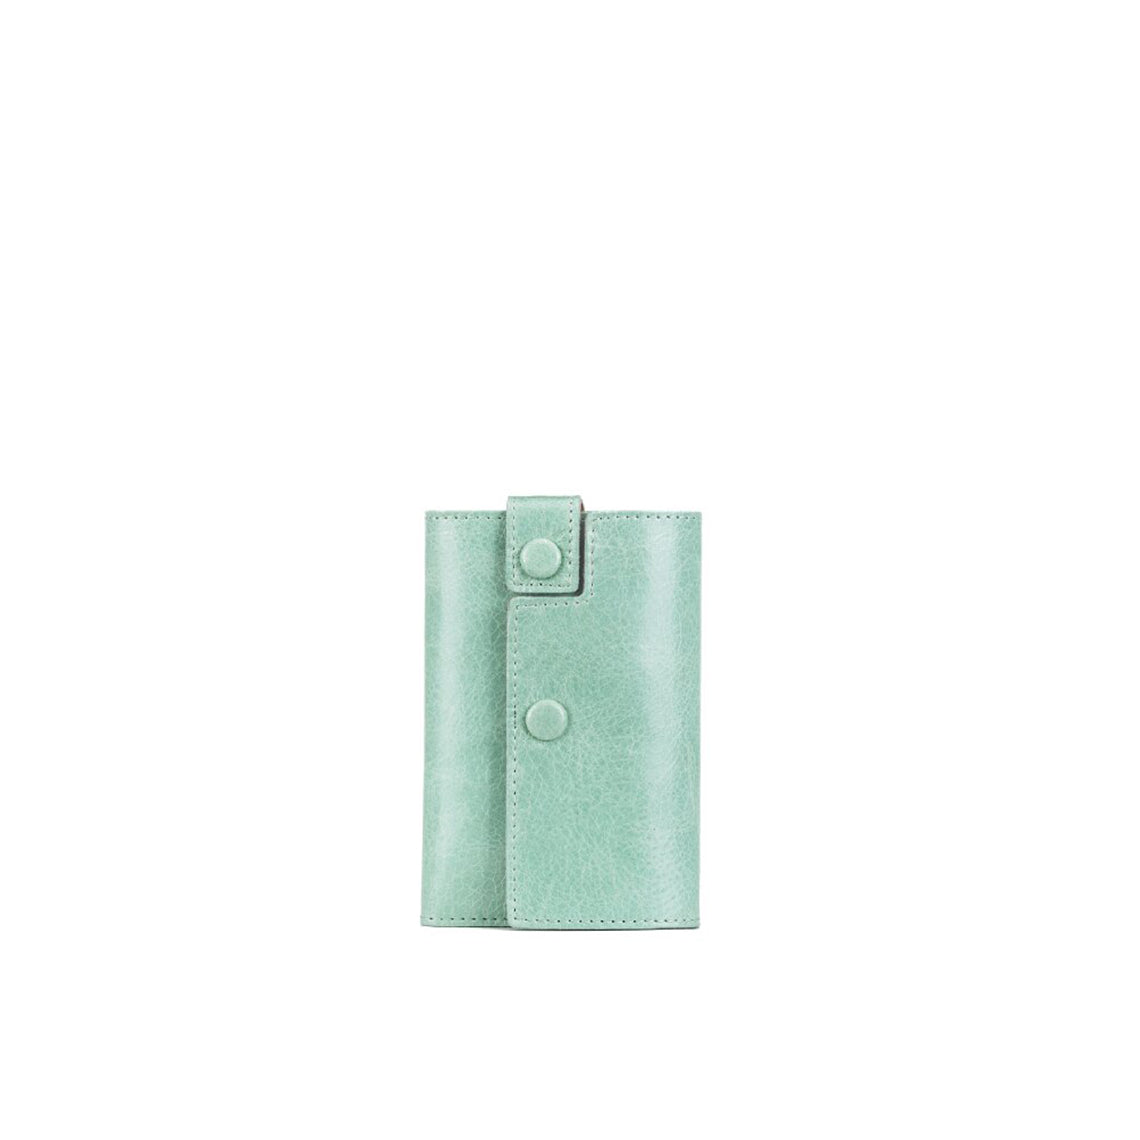 Real Leather Slim Wallet Purse Credit Card Holder in Green - POPSEWING™